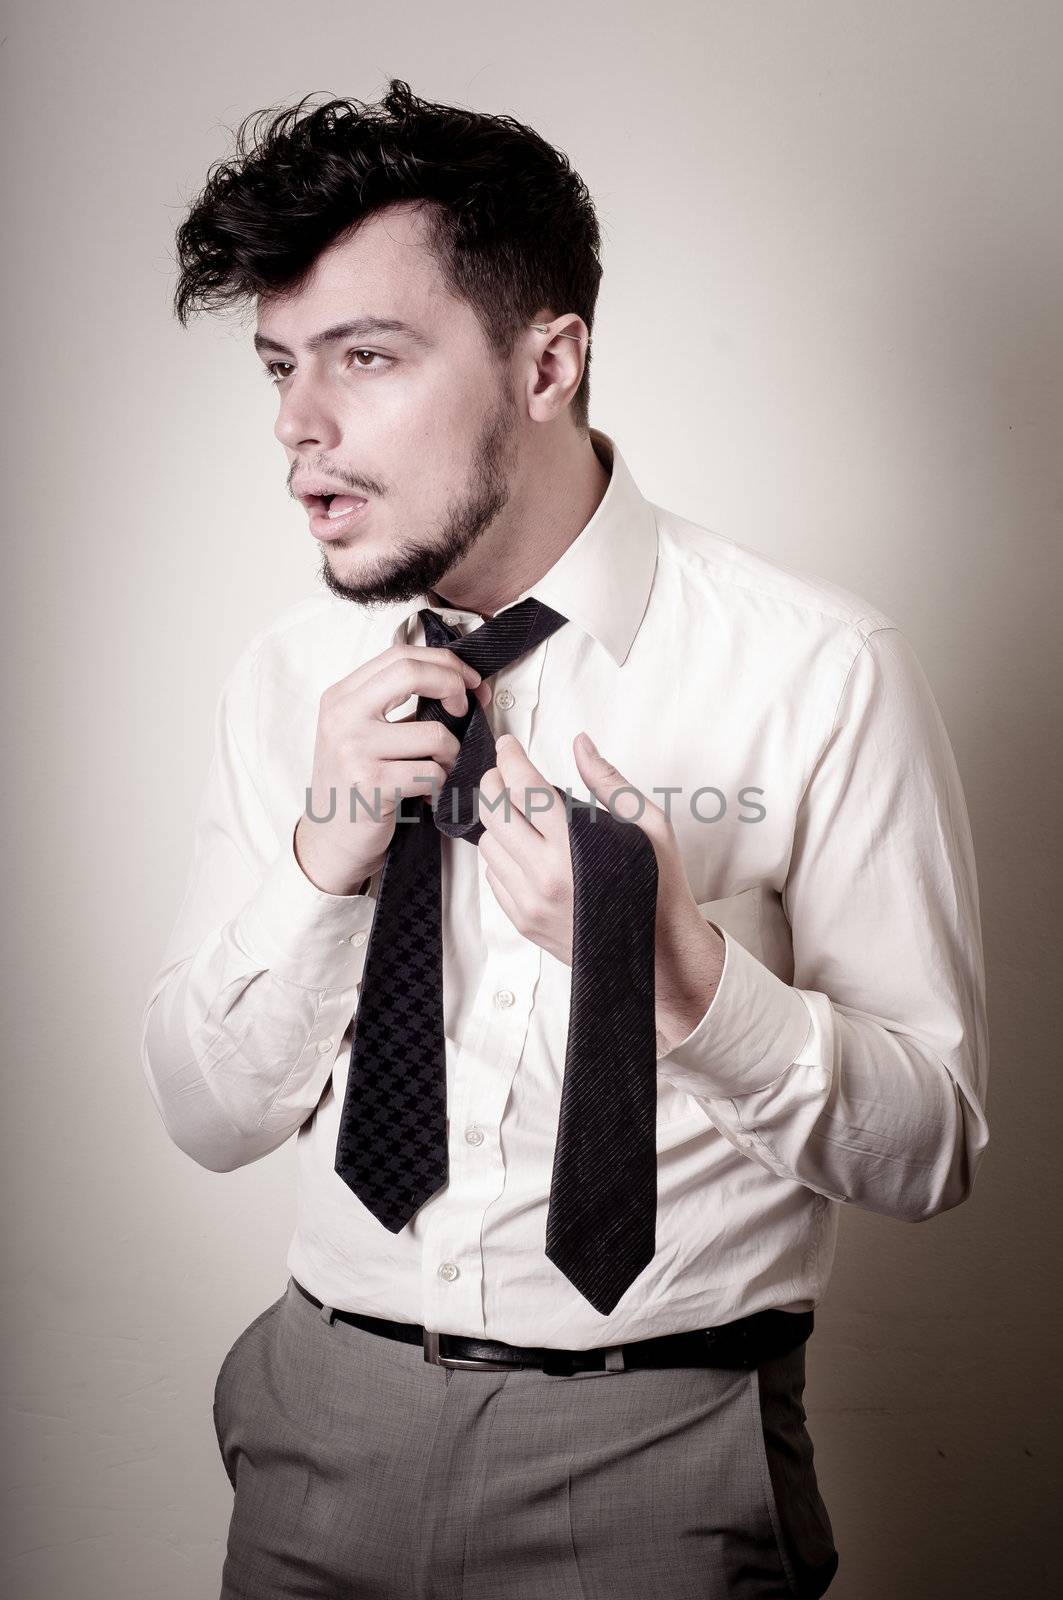 stressed businessman on gray background